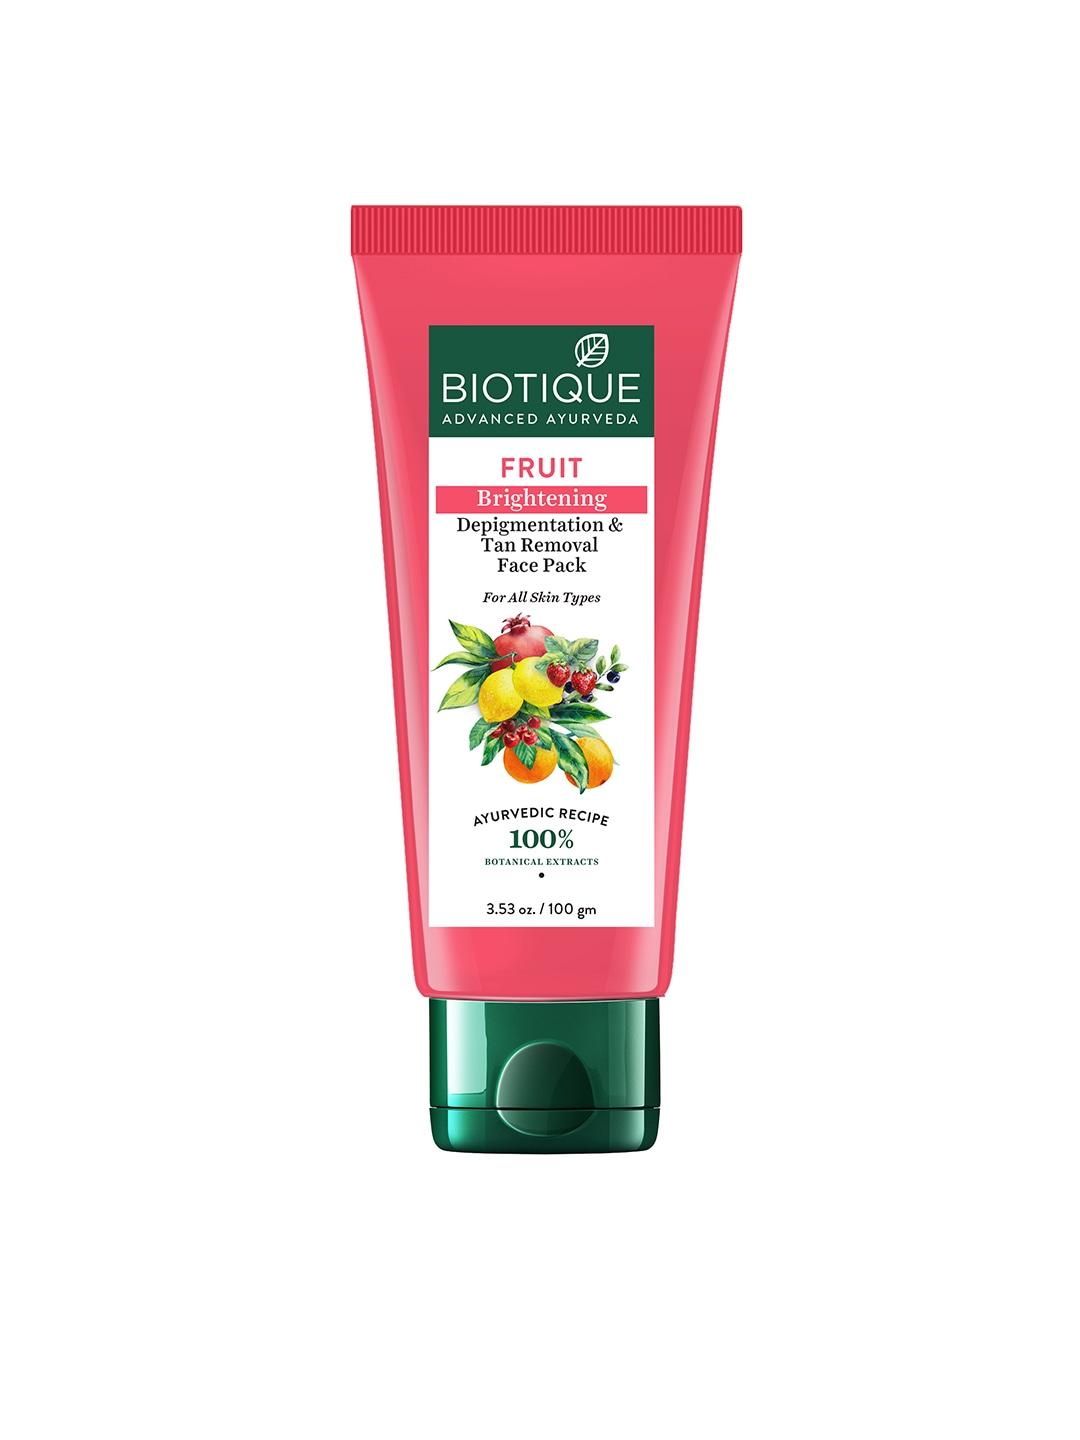 Biotique Bio Fruit Whitening, Depigmentation & Tan Removal Sustainable Face Pack 100 g